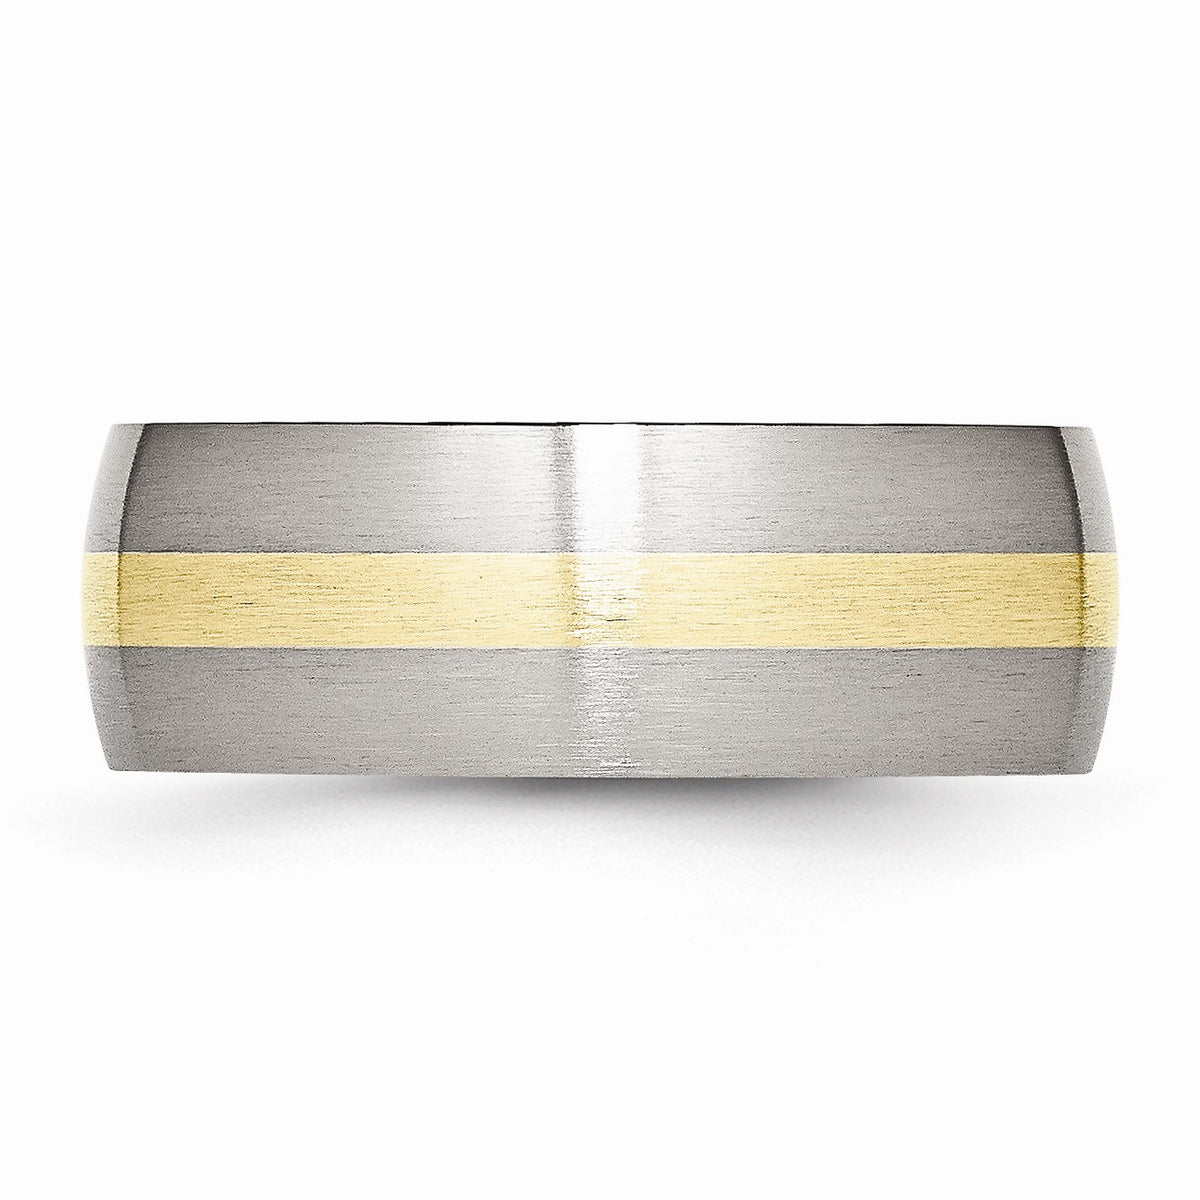 Alternate view of the Stainless Steel &amp; 14K Gold Inlay, 8mm Satin Unisex Band by The Black Bow Jewelry Co.